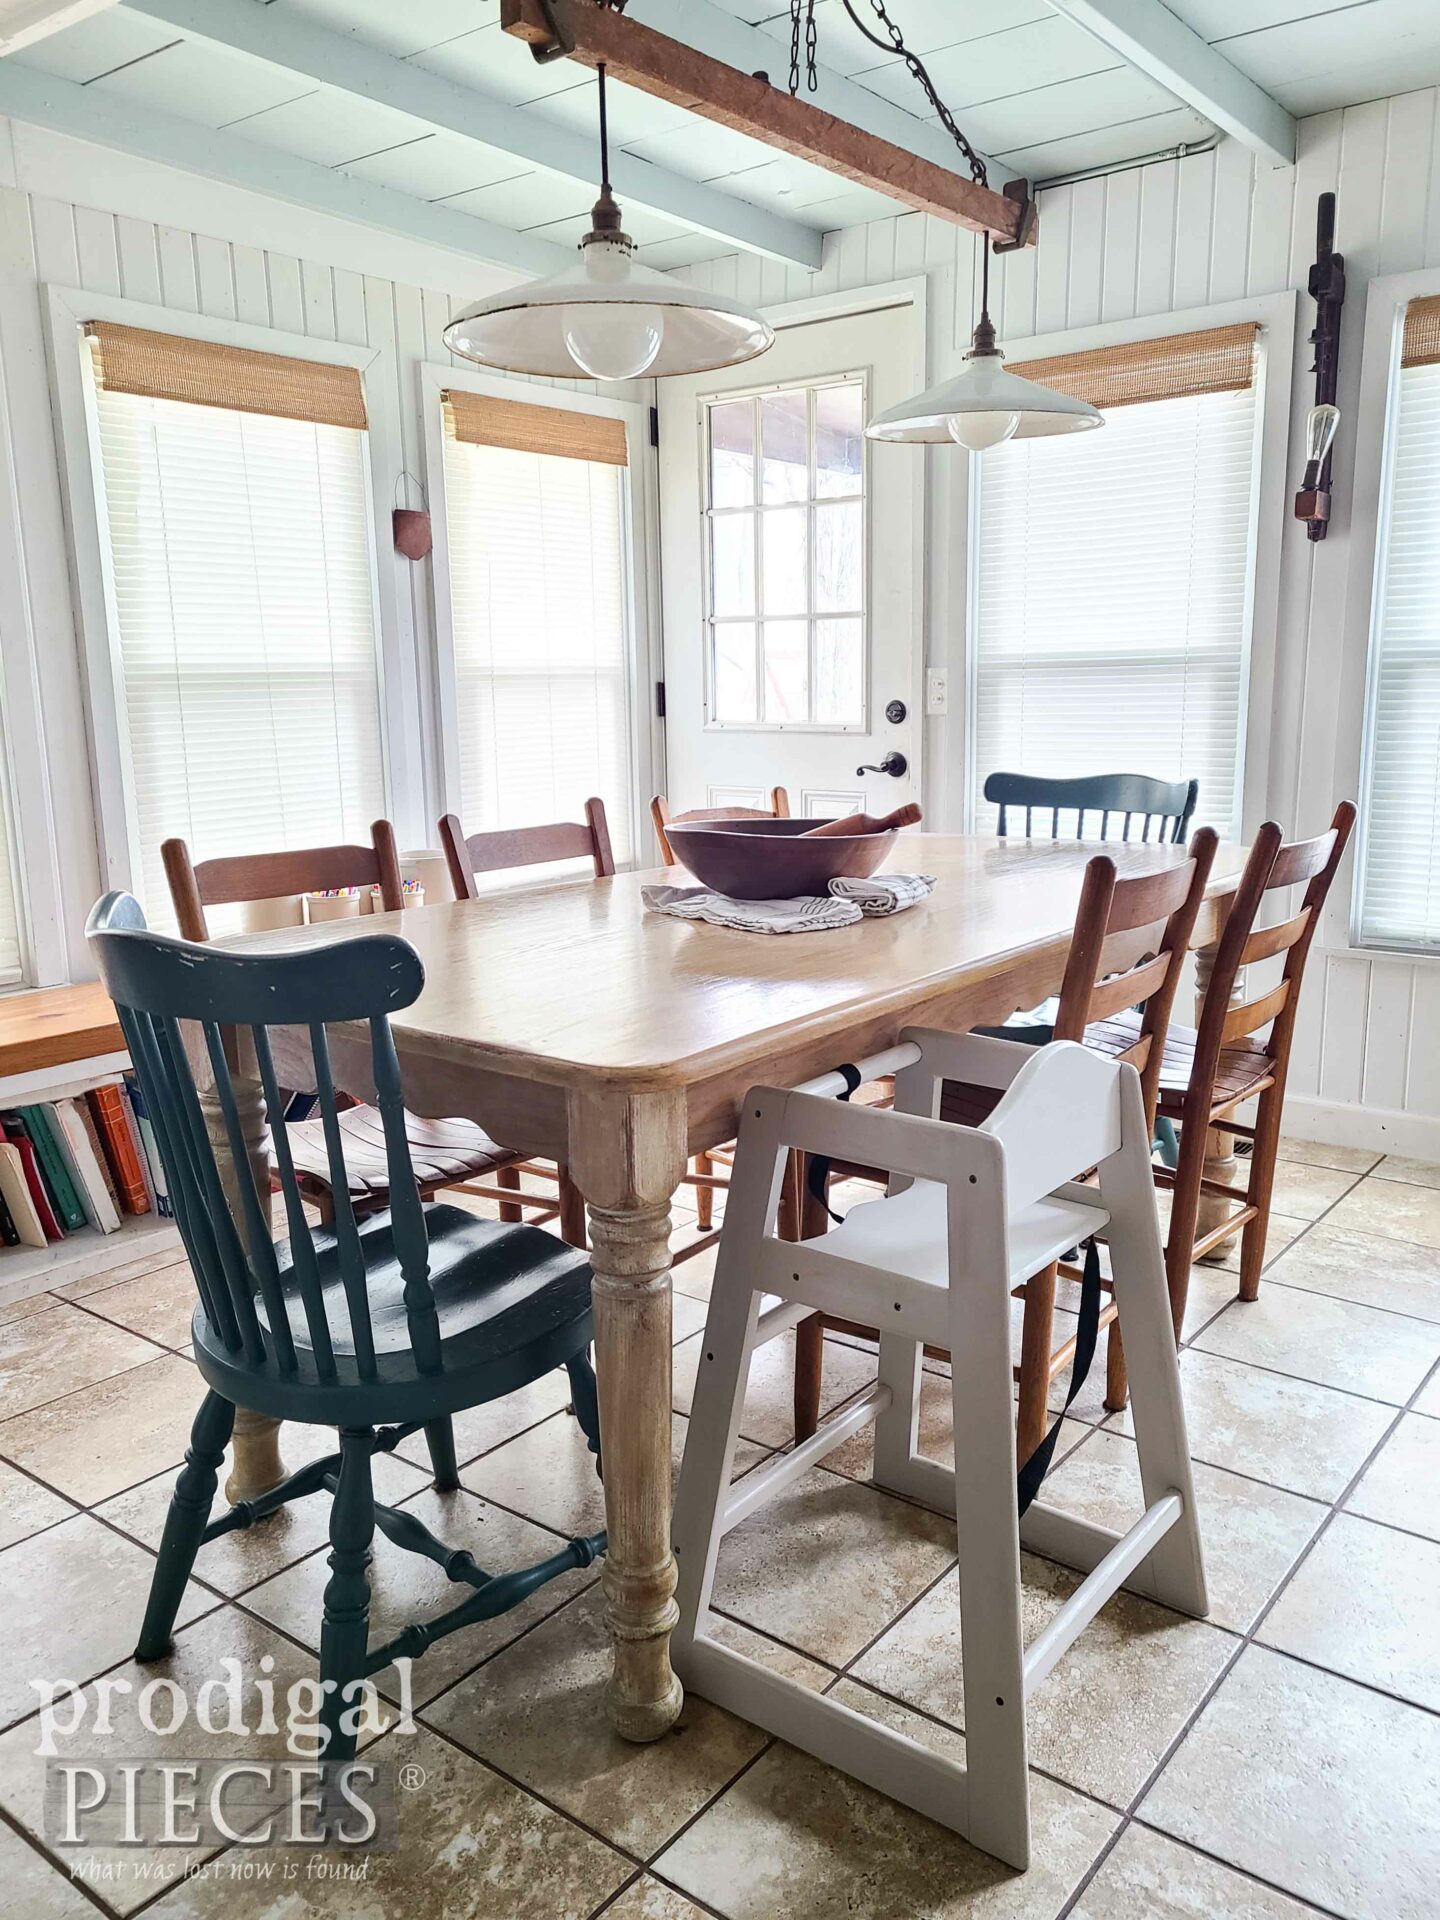 Eclectic Farmhouse Dining Table with DIY Painted Highchair by Larissa of Prodigal Pieces | prodigalpieces.com #prodigalpieces #farmhouse #dining #baby